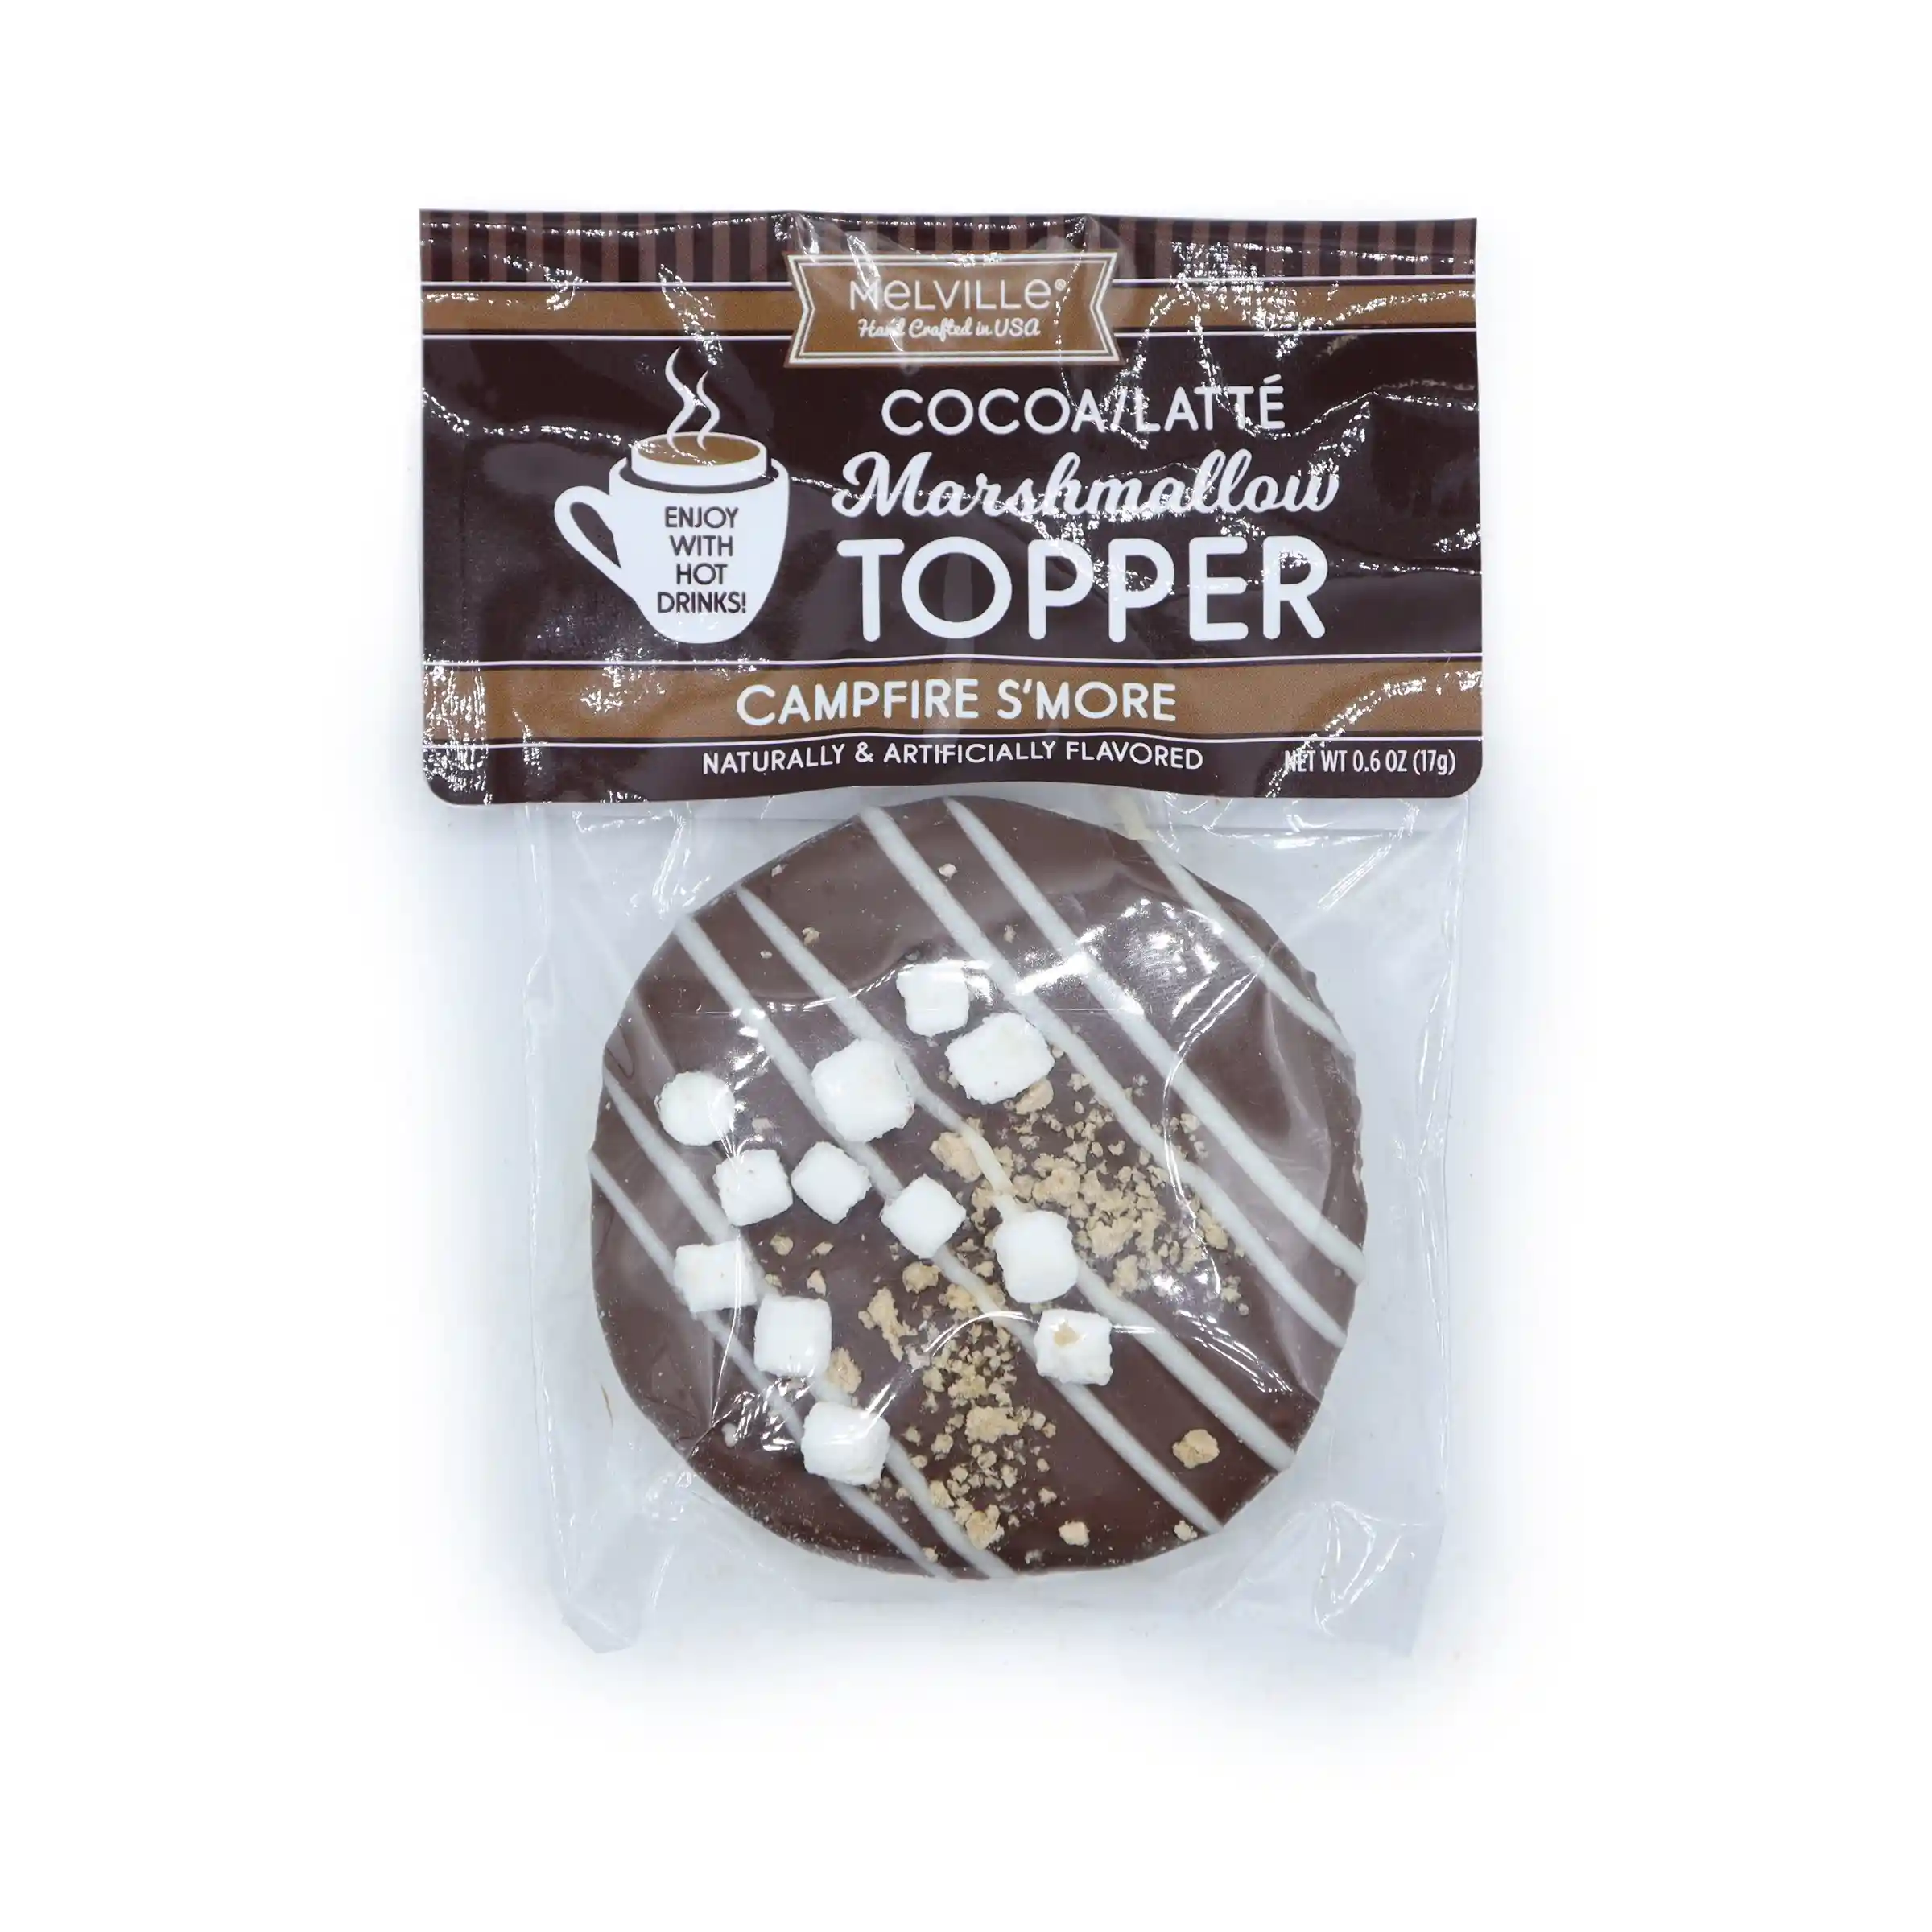 Marshmallow Edible Hot Cocoa Snowman Drink Toppers, 2.5 oz., 12-Count